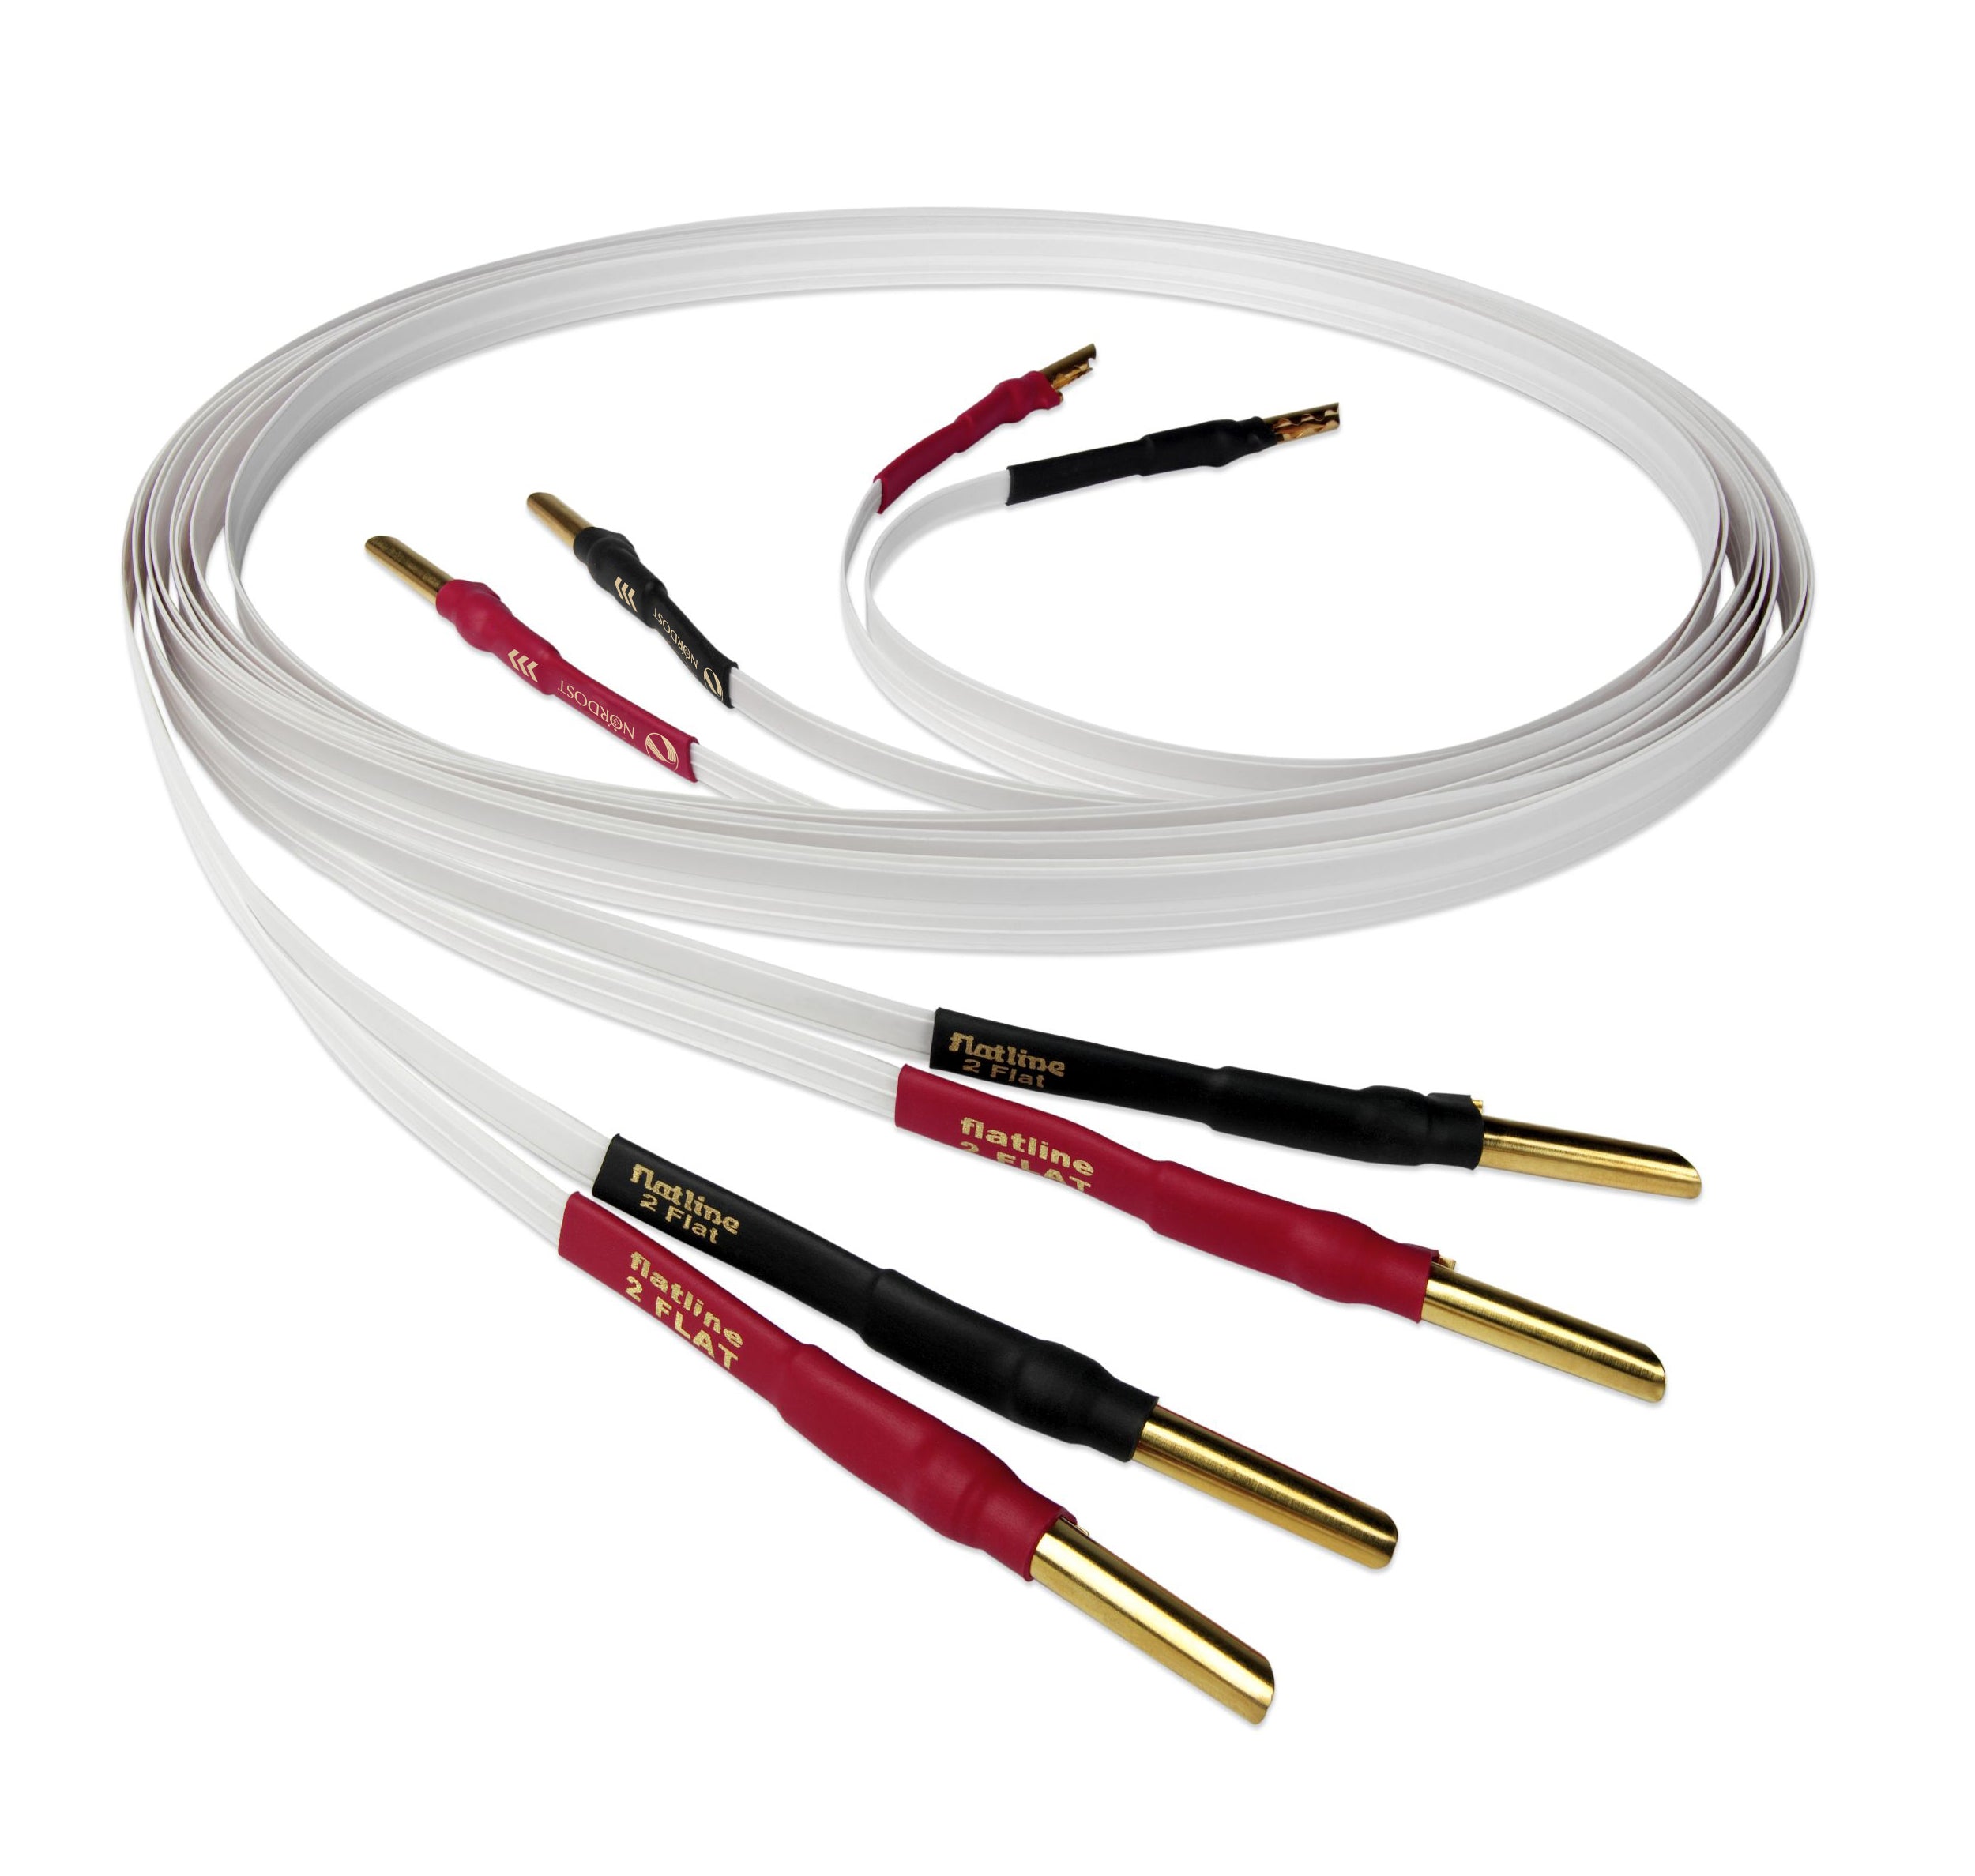 Nordost Leifstyle 2 Flat Speaker Cable